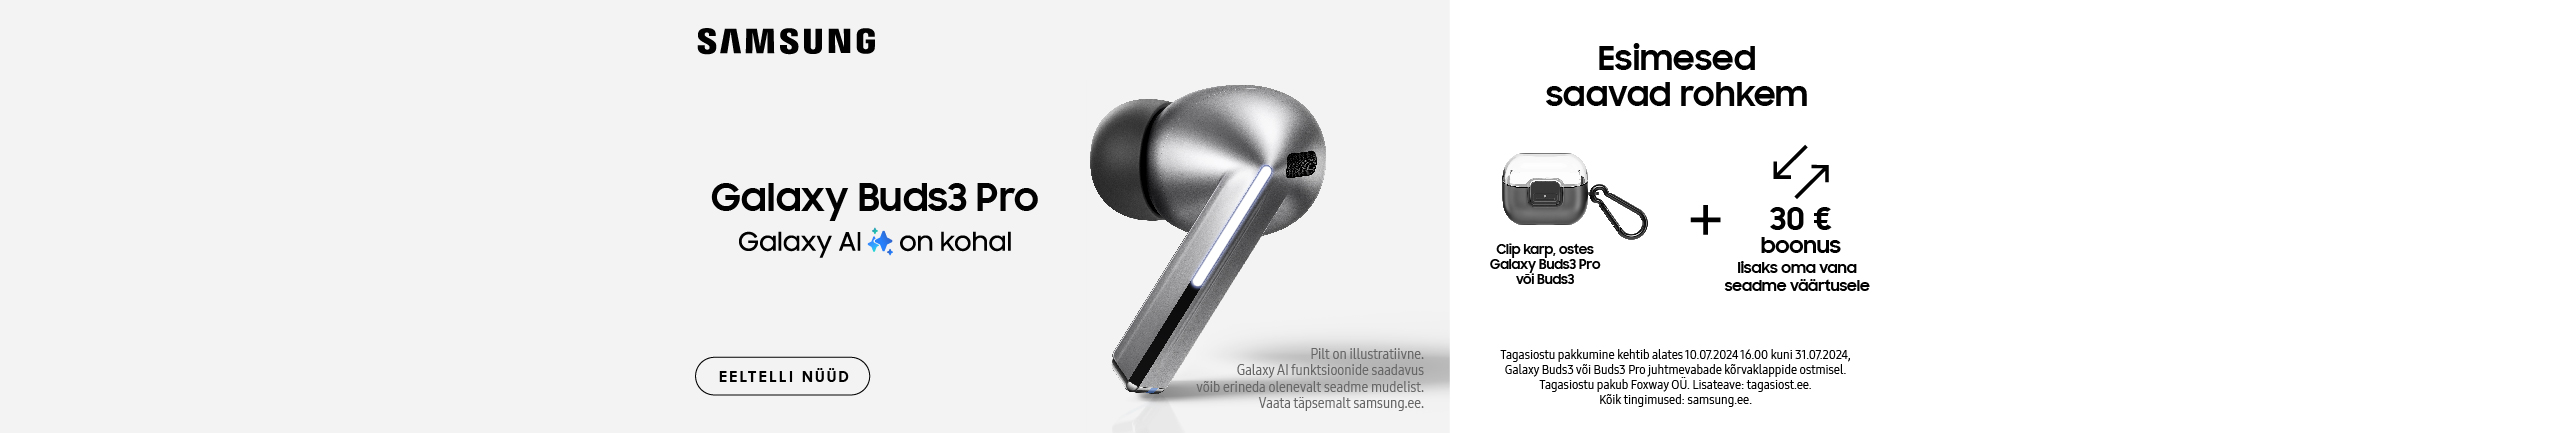 Buy Samsung Galaxy Buds 3 or Buds 3 Pro and get a Clip case as a gift!